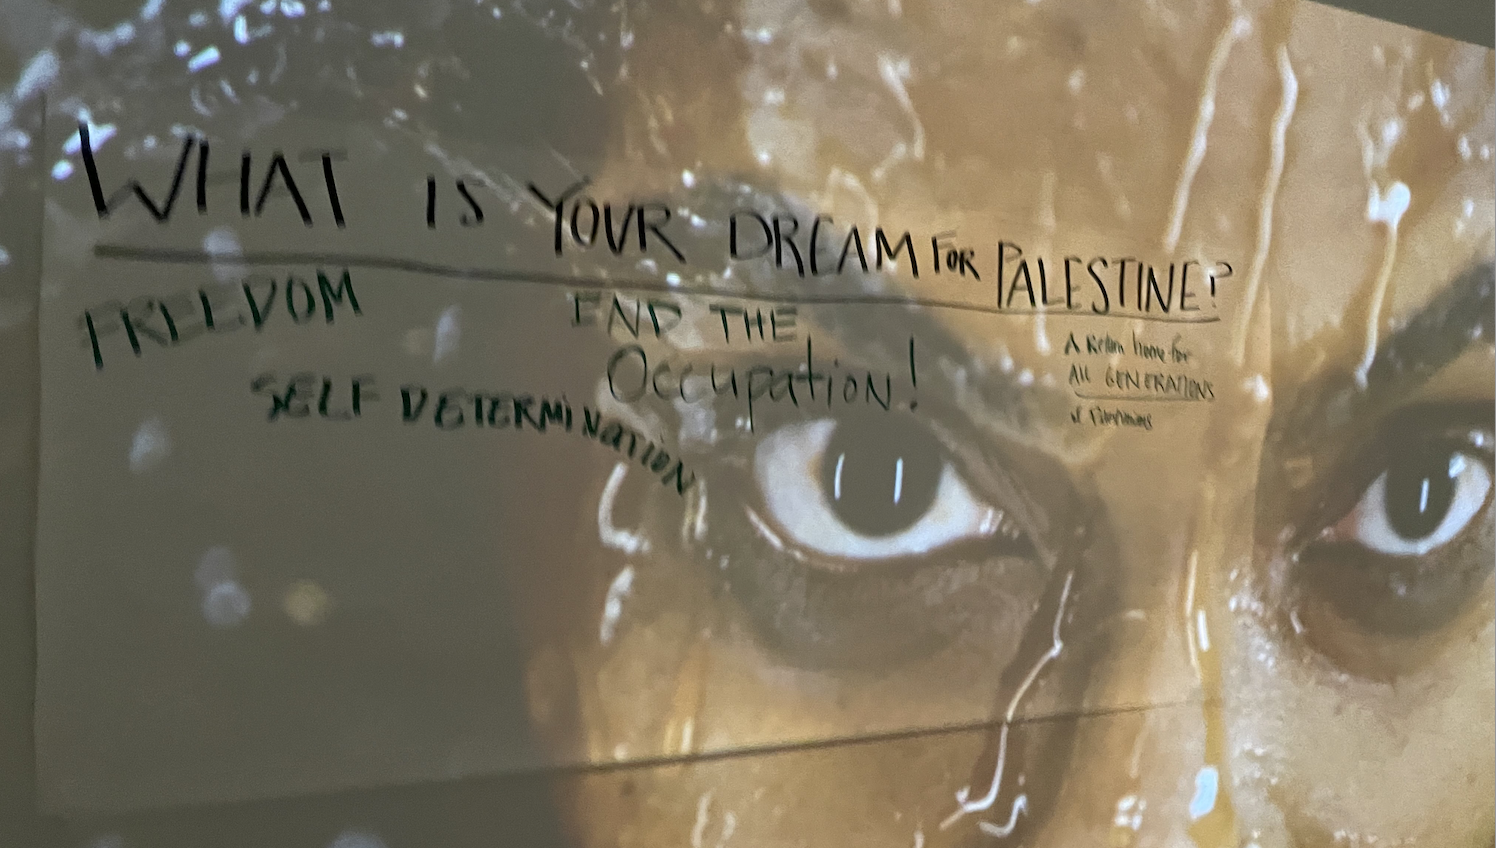 Installation featuring the face of a woman of African descent covered in honey. Words on paper over it read "What is your dream for Palestine?"